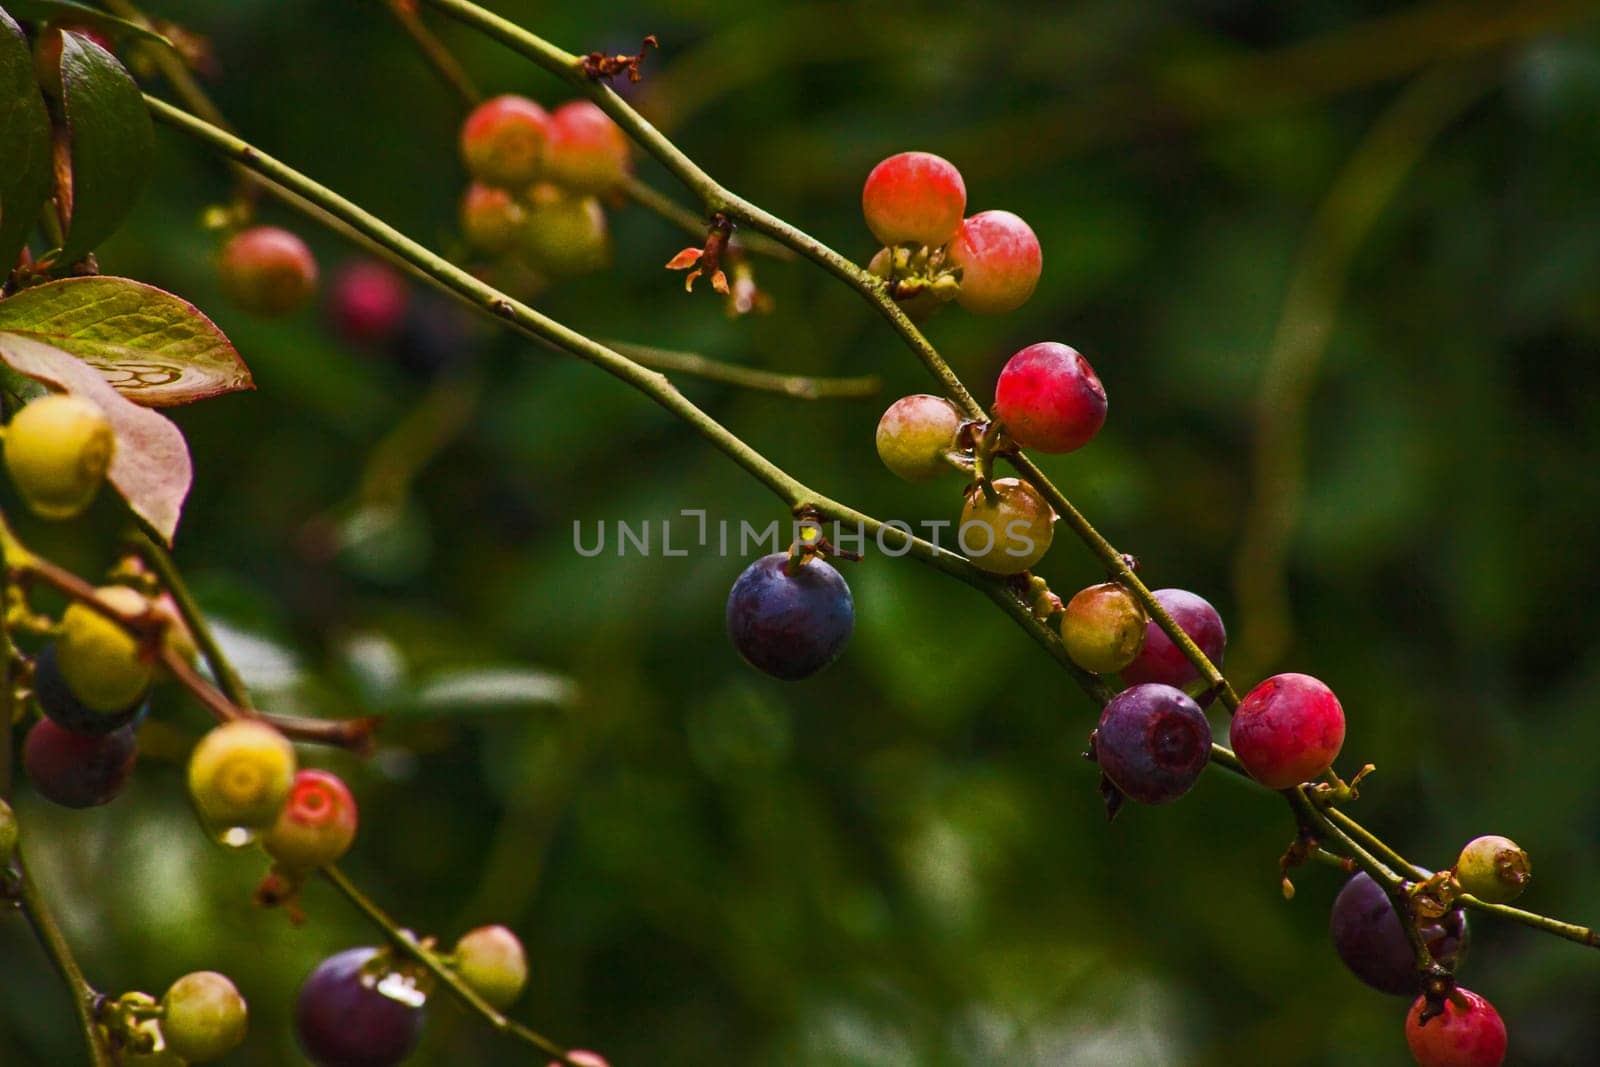 Ripening Blueberry crop 14344 by kobus_peche